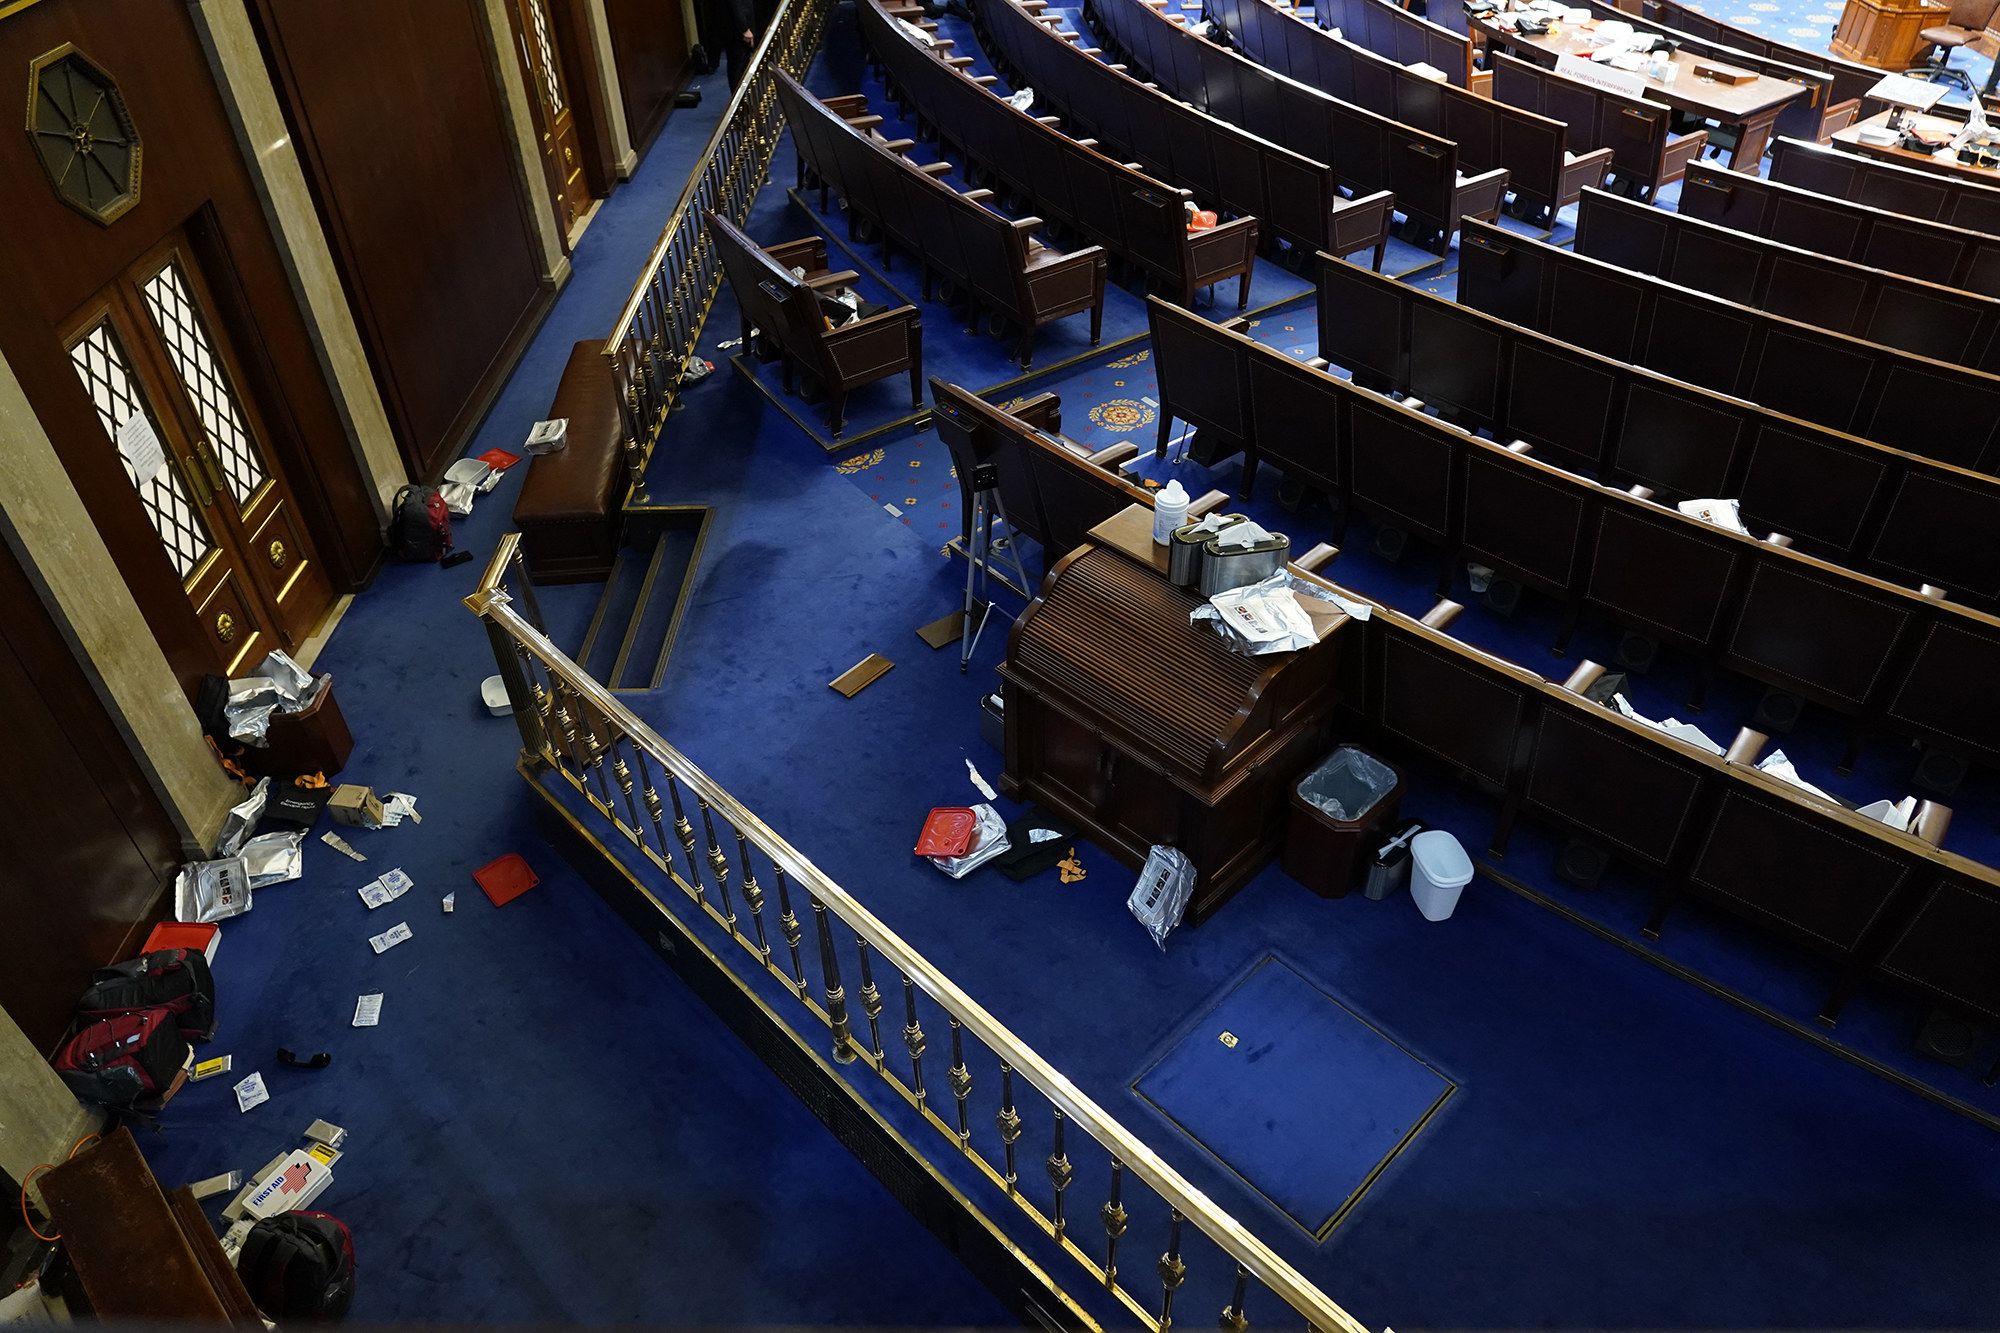 Litter and gas mask wrappers are strewn on the floor